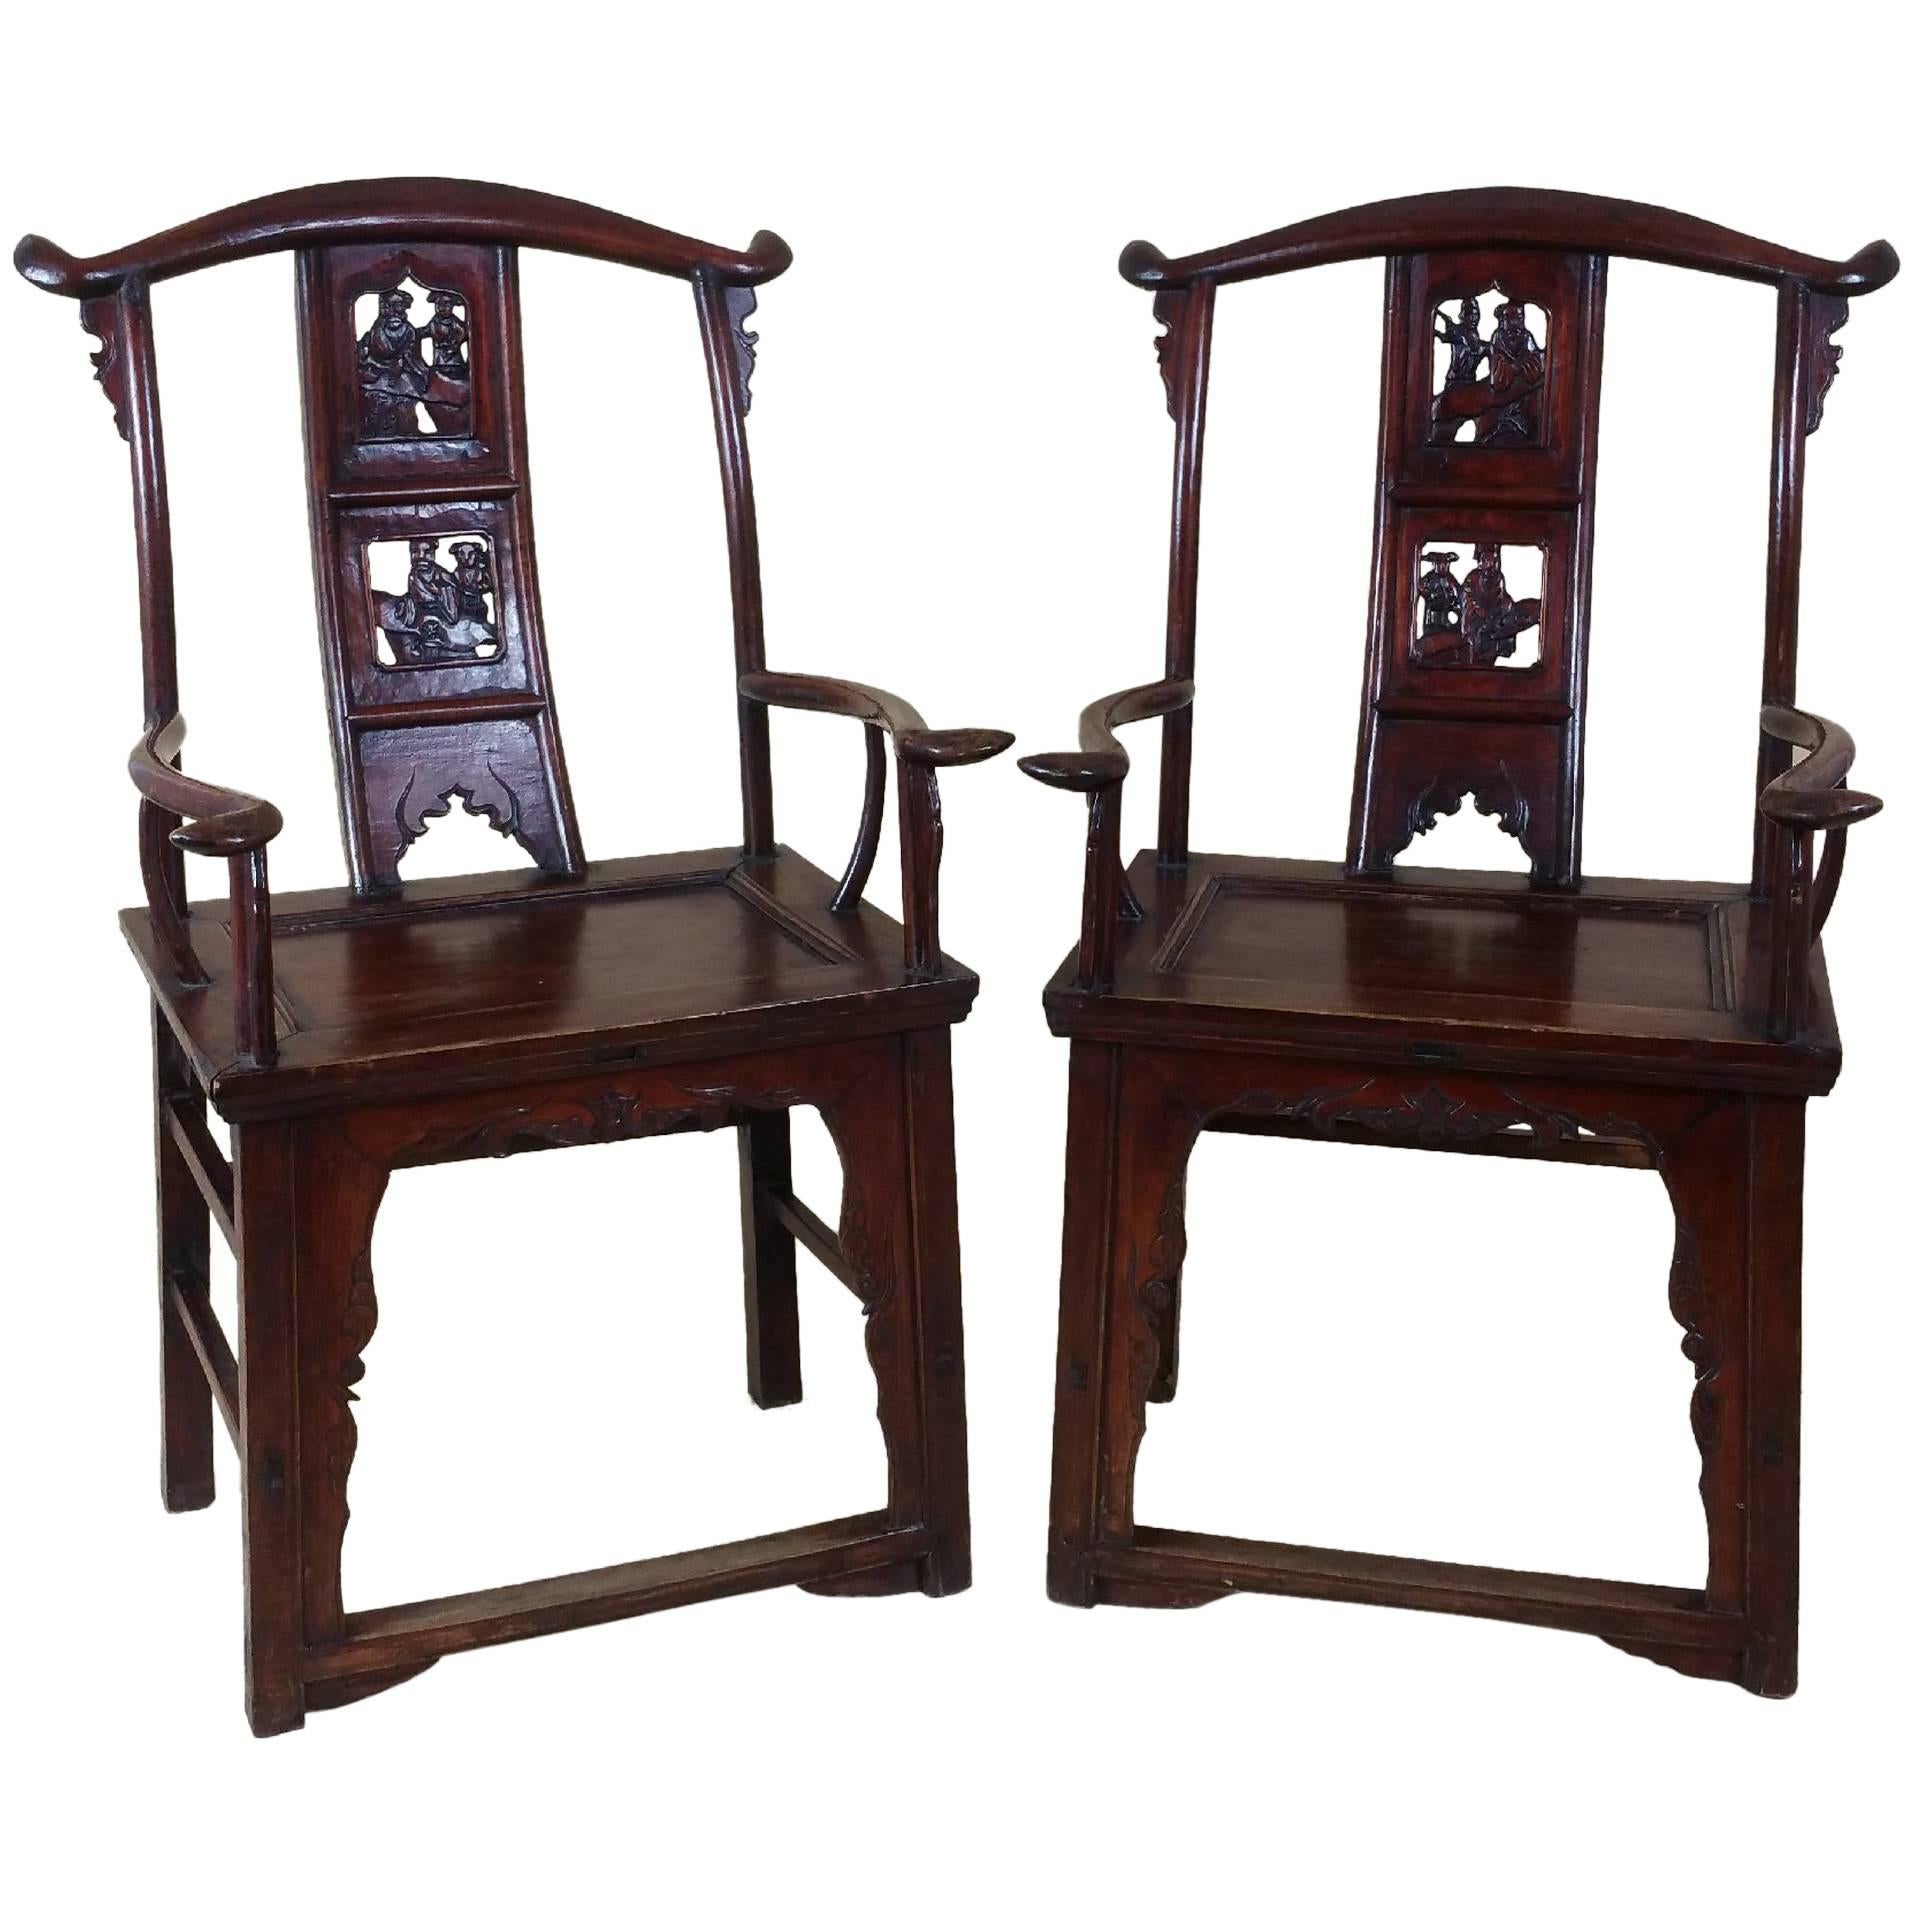 Pair of Mid-19th Century Chinese Carved Elm and Fruitwood Armchairs